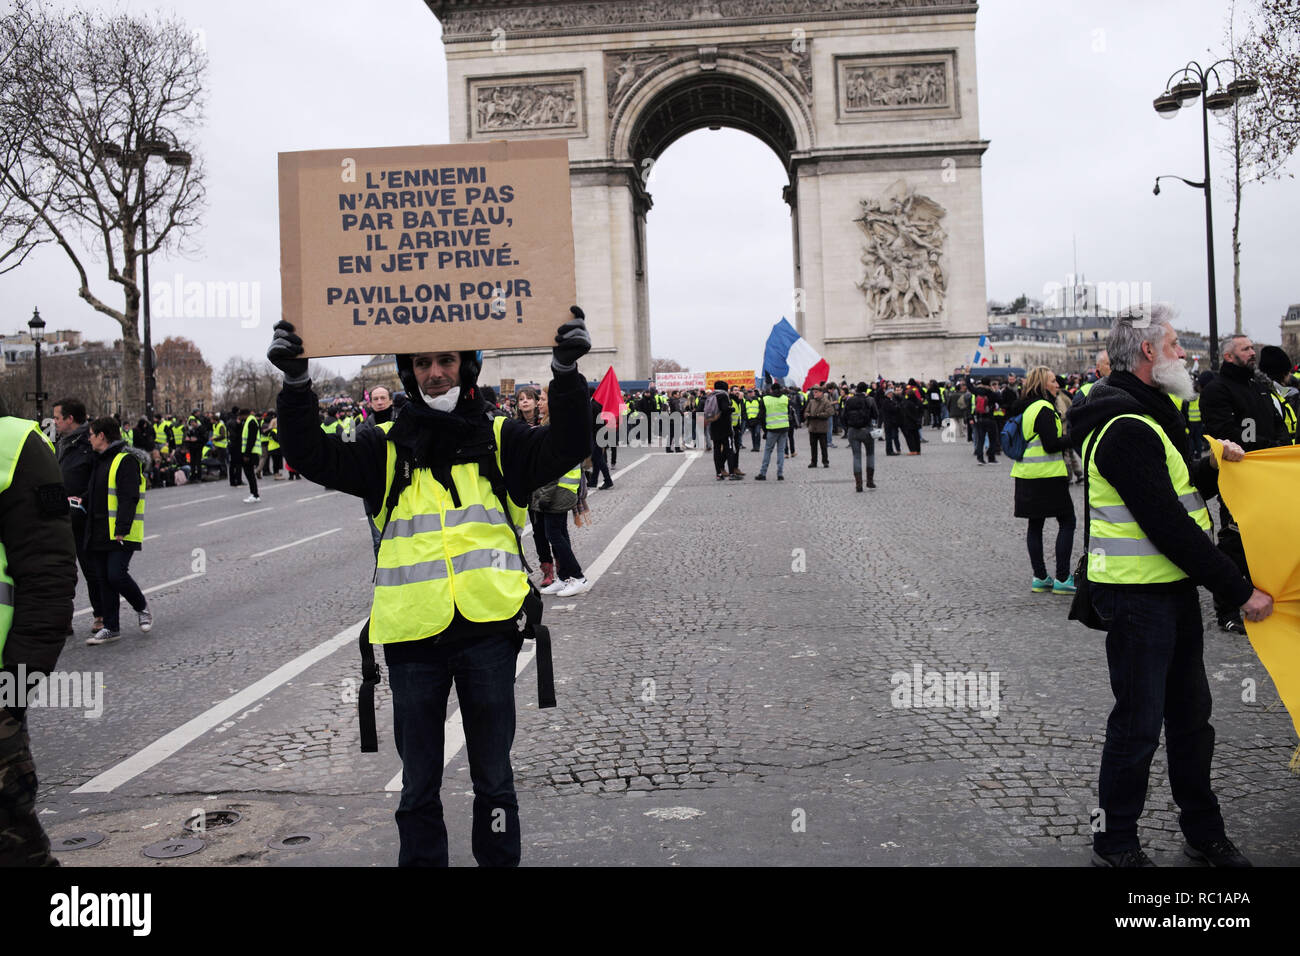 Paris, France. 12th January, 2019. Gilets Jaunes, Yellow Vests,  demonstrators, are walking and showing their signs and complains "The Enemy  is not coming on boats, he's coming on private jets, give the